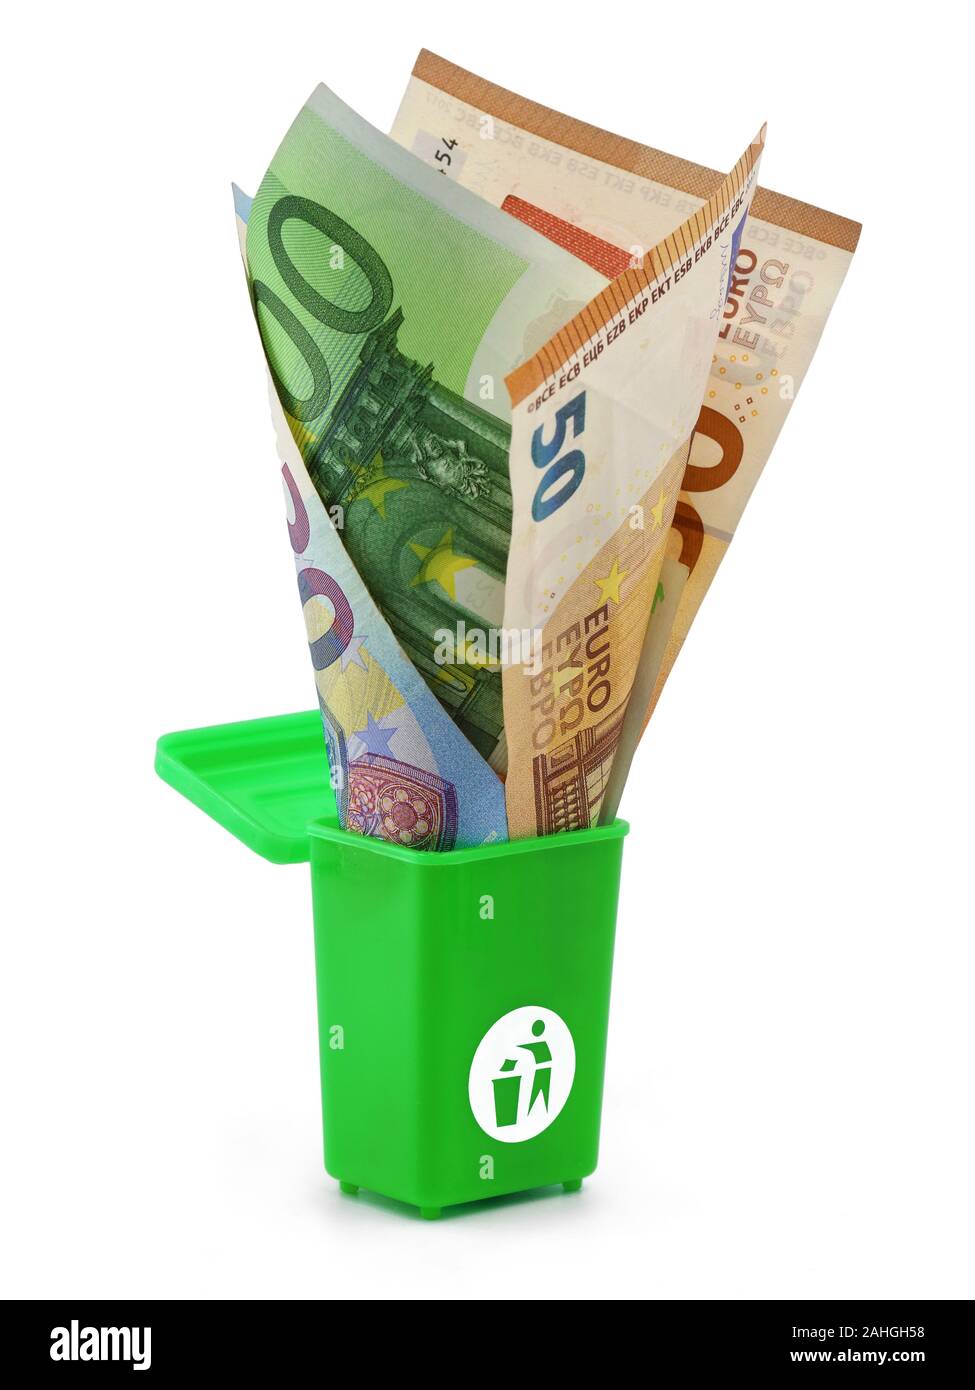 Euro banknotes in a green dust bin isolated on white background, concept of money wasting Stock Photo